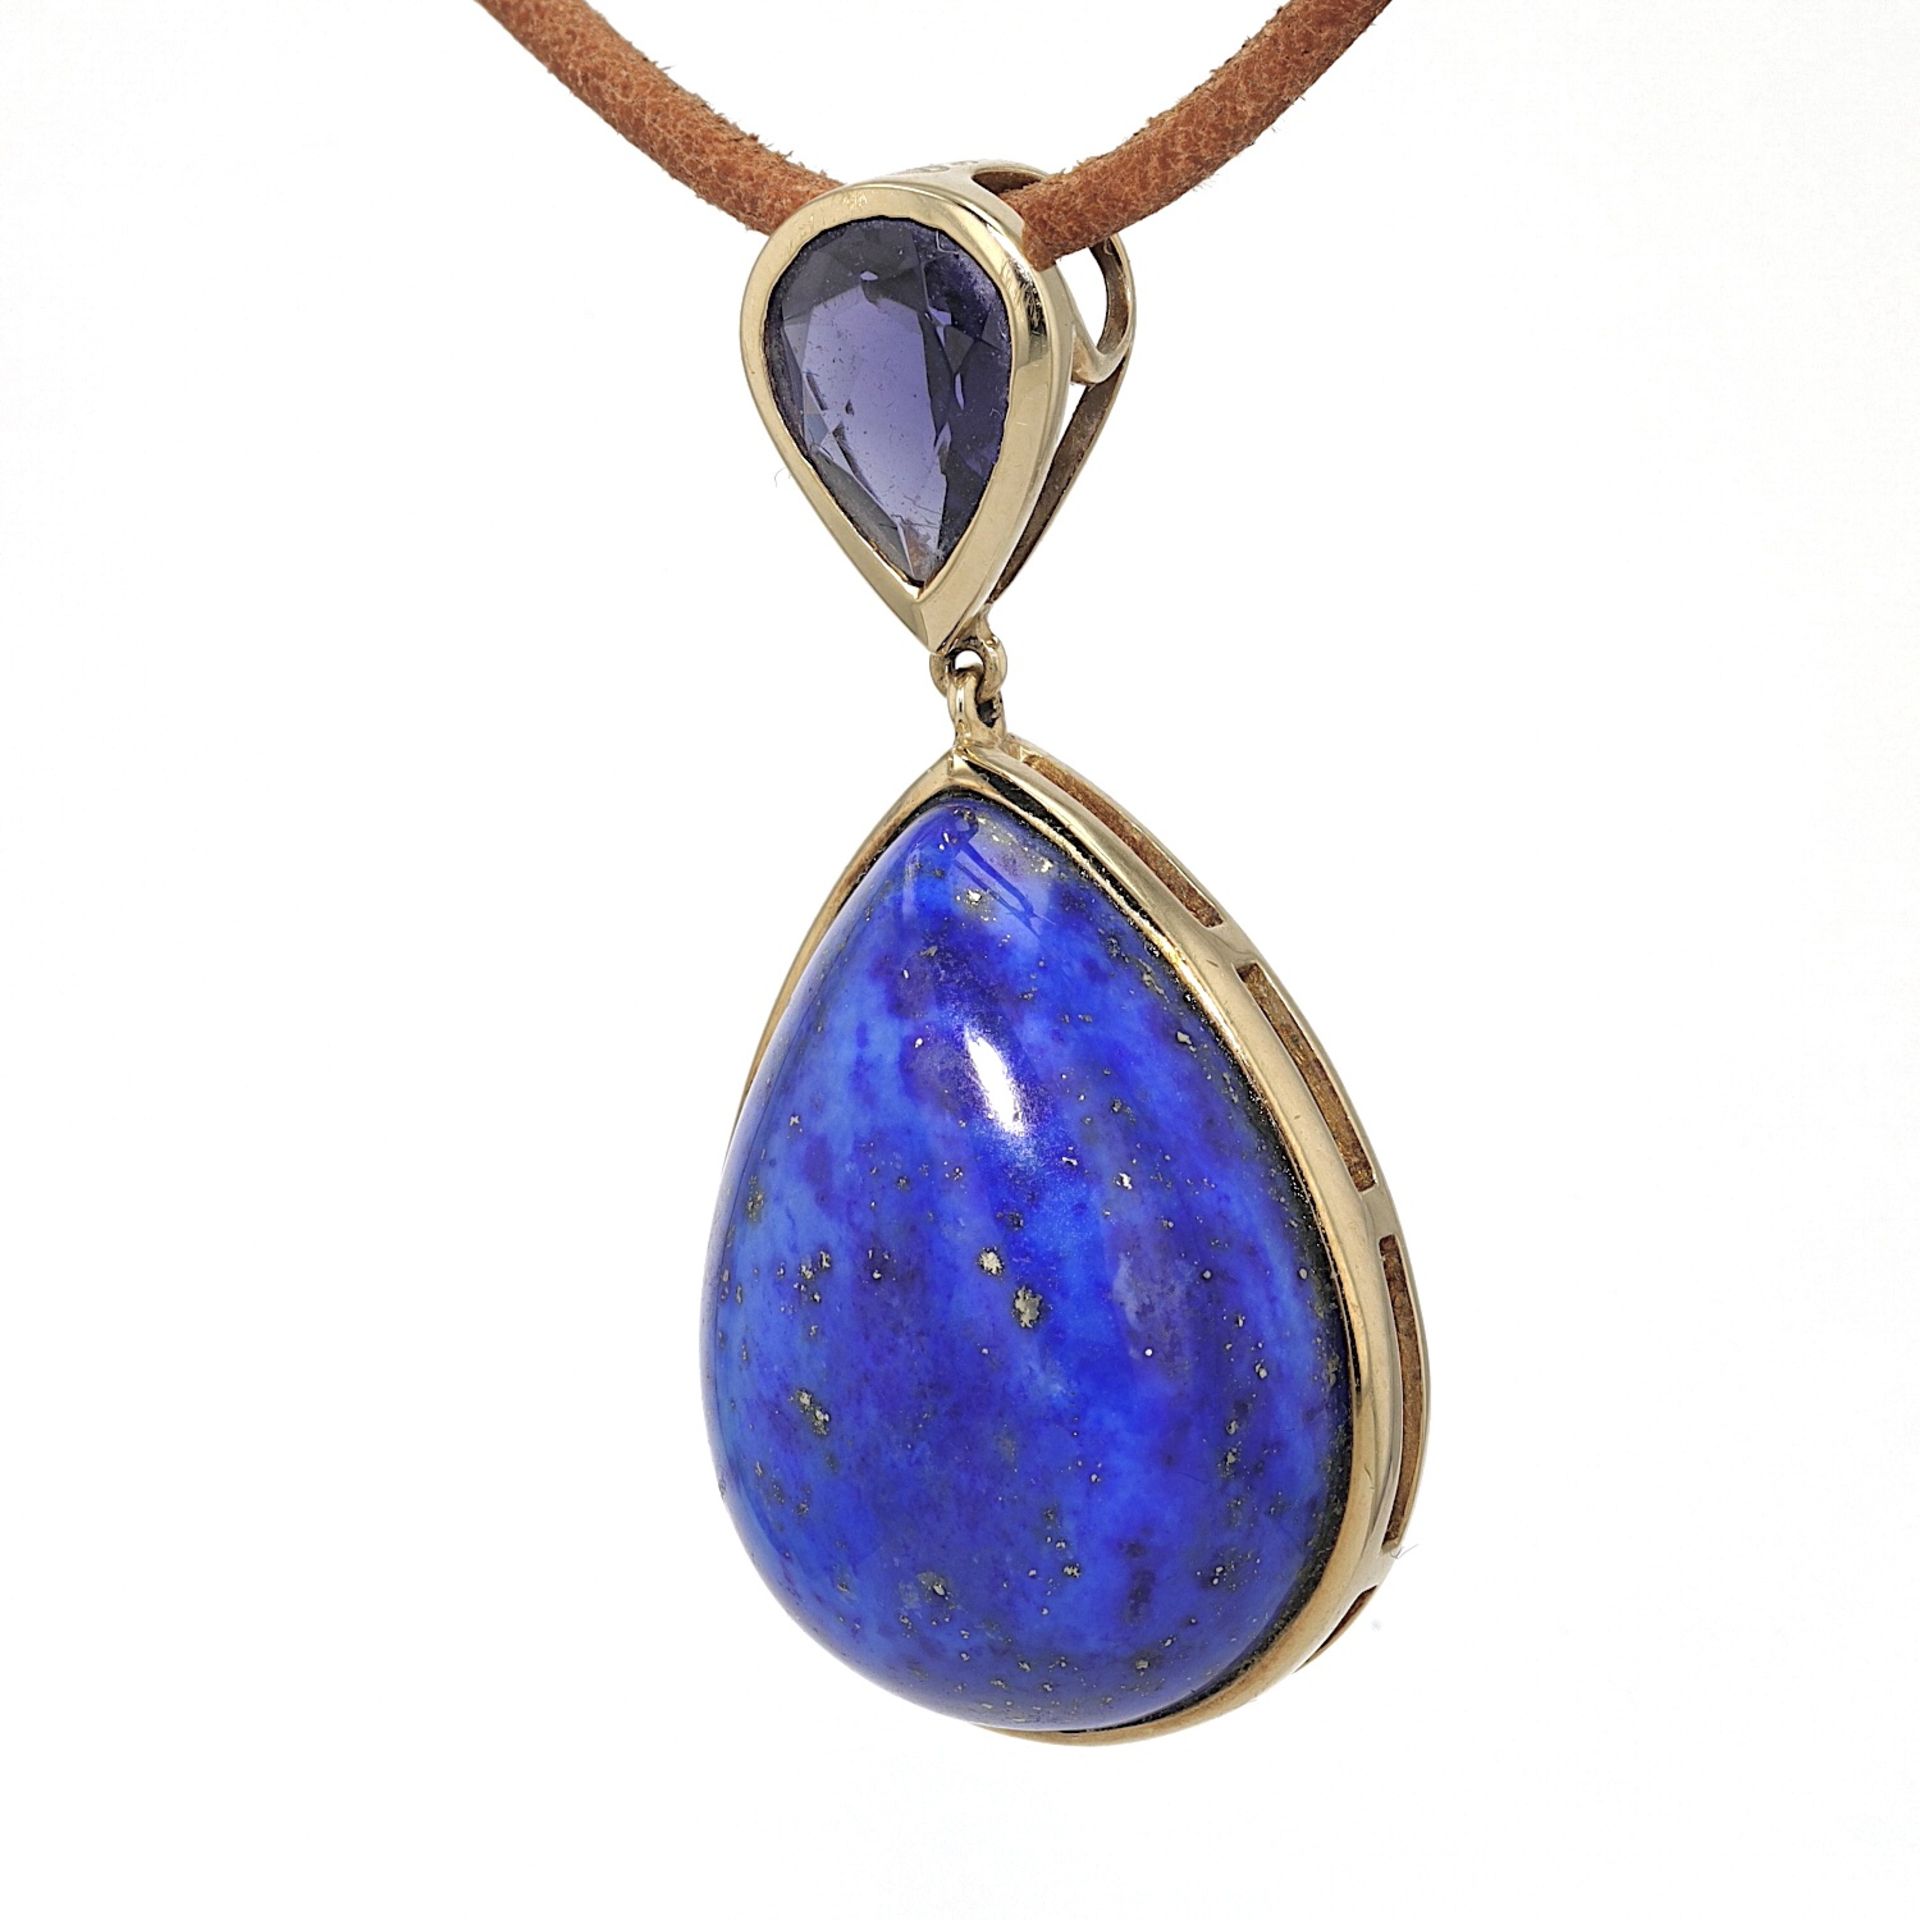 Pendant with a lapis lazuli - Image 2 of 4